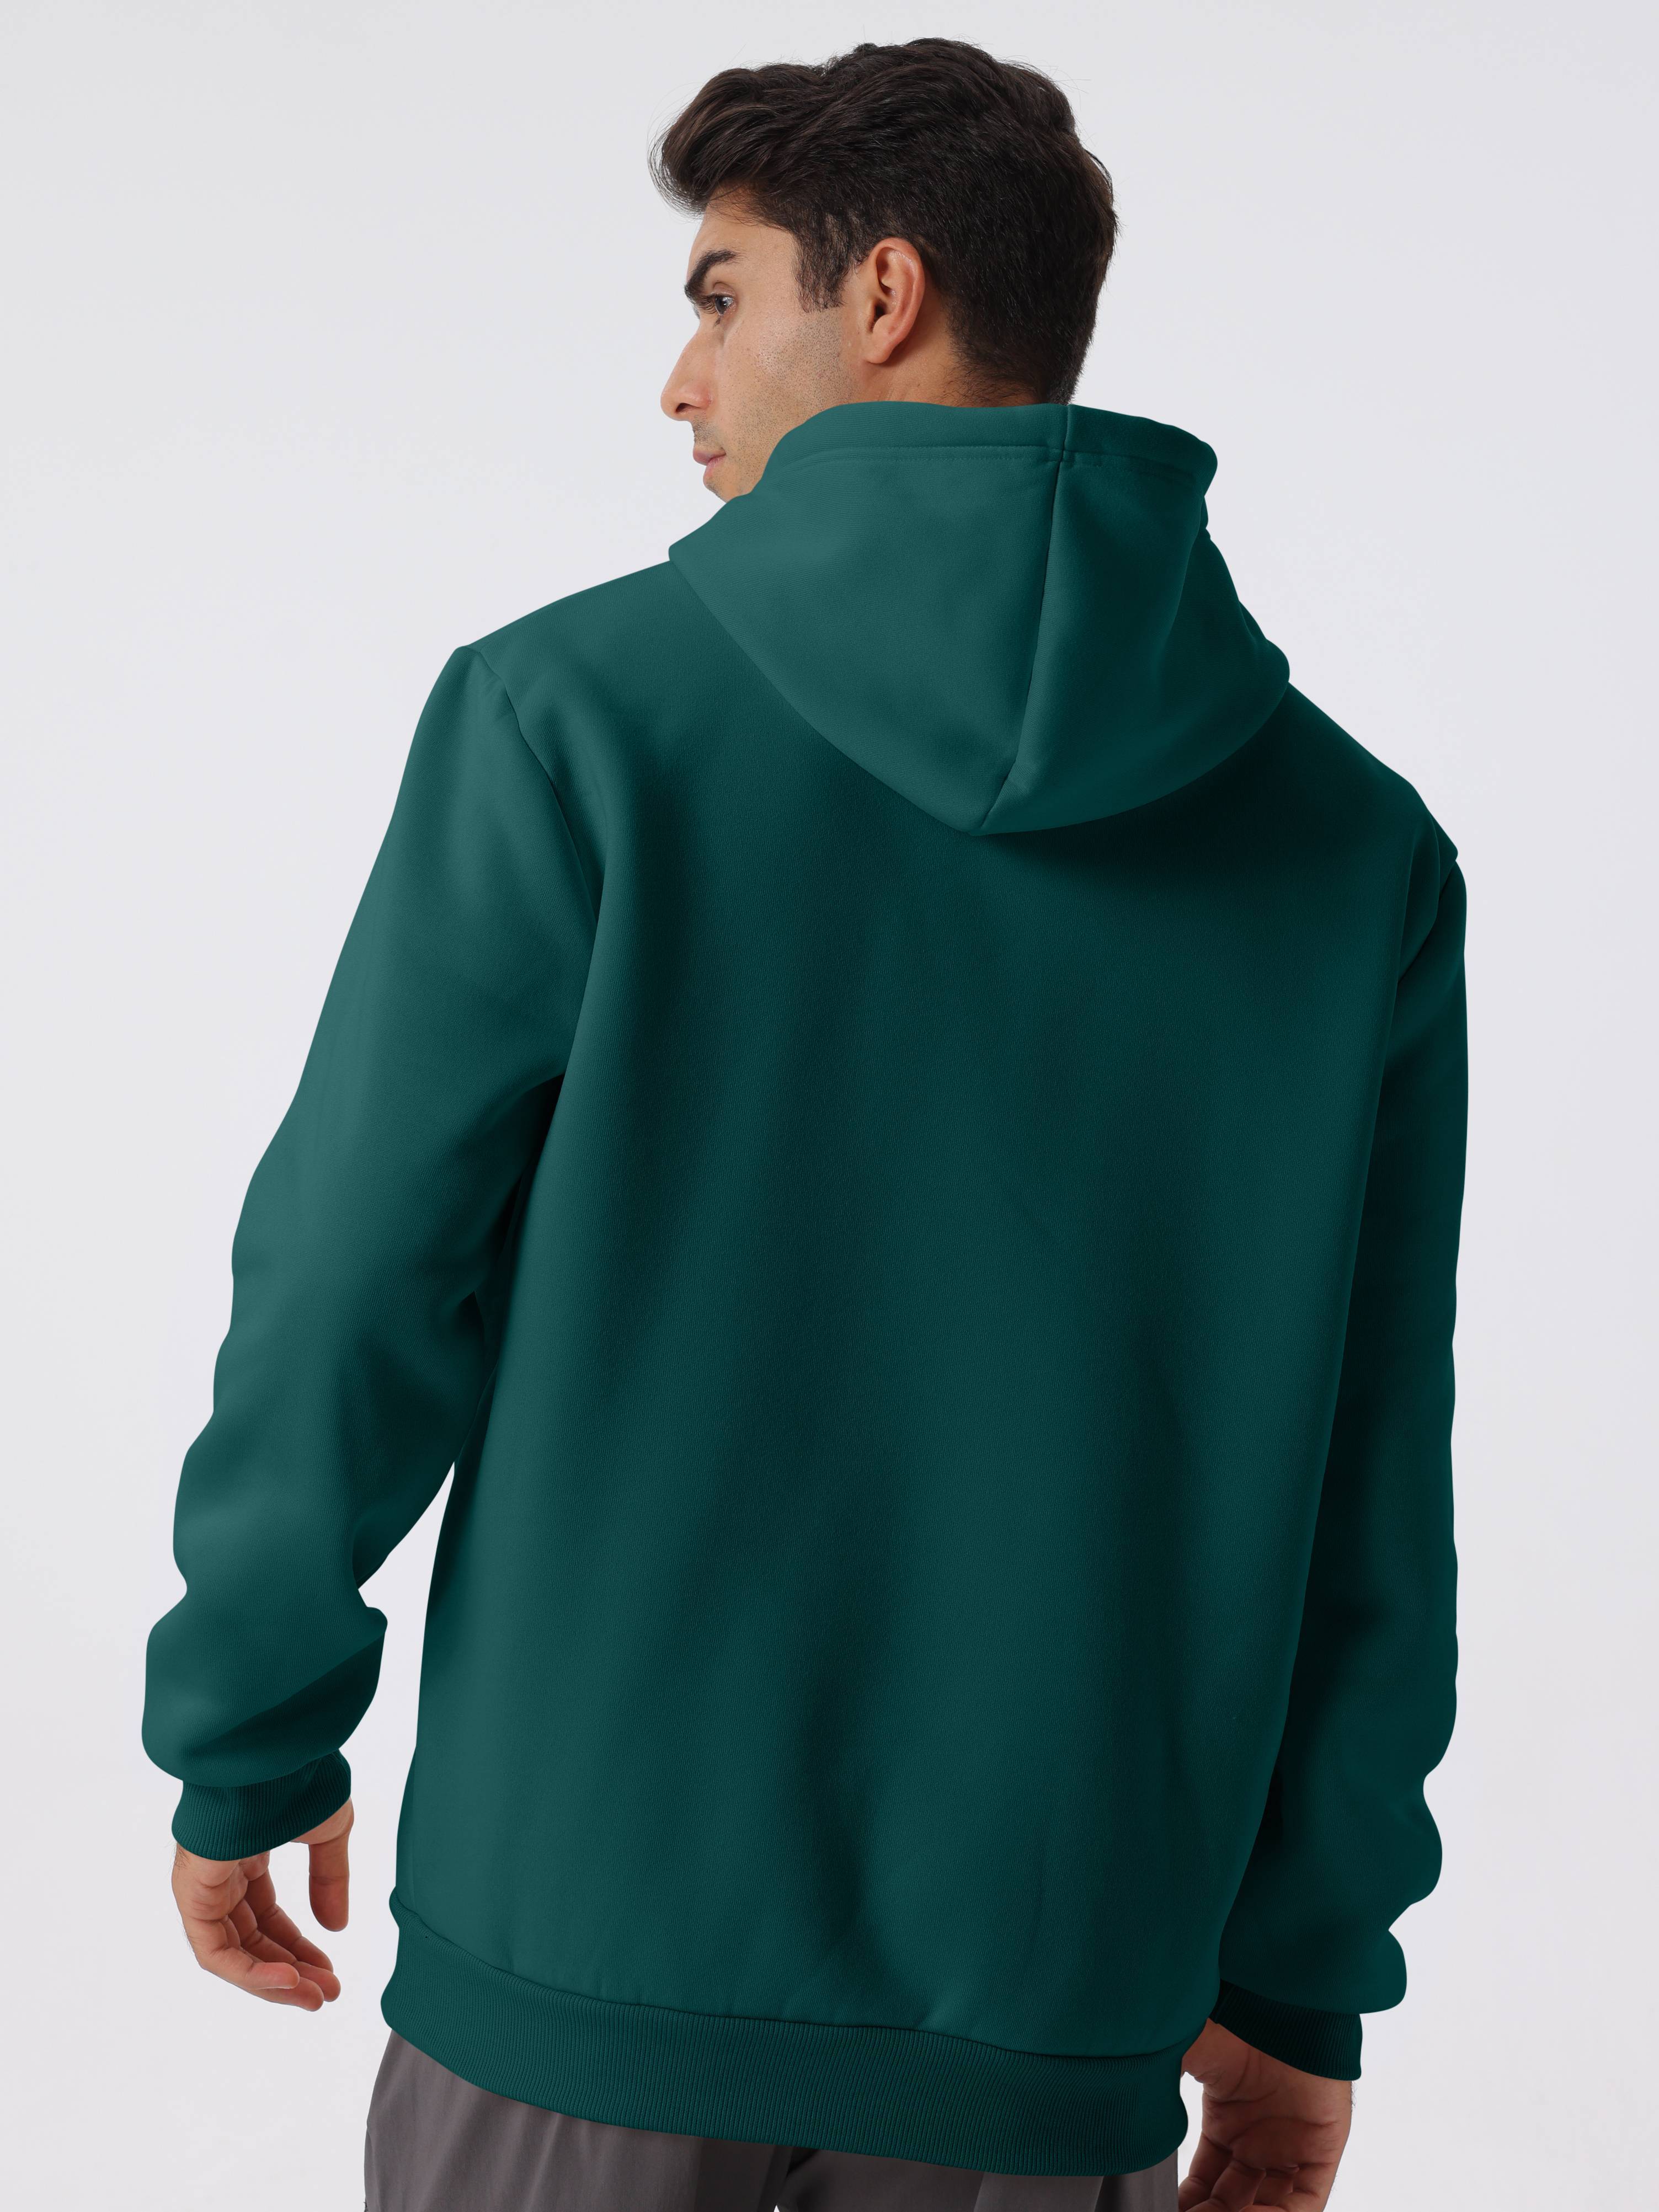 you design here letter print customized kangaroo pocket hoodie casual long sleeve hoodies pullover sweatshirt mens clothing for fall winter details 6